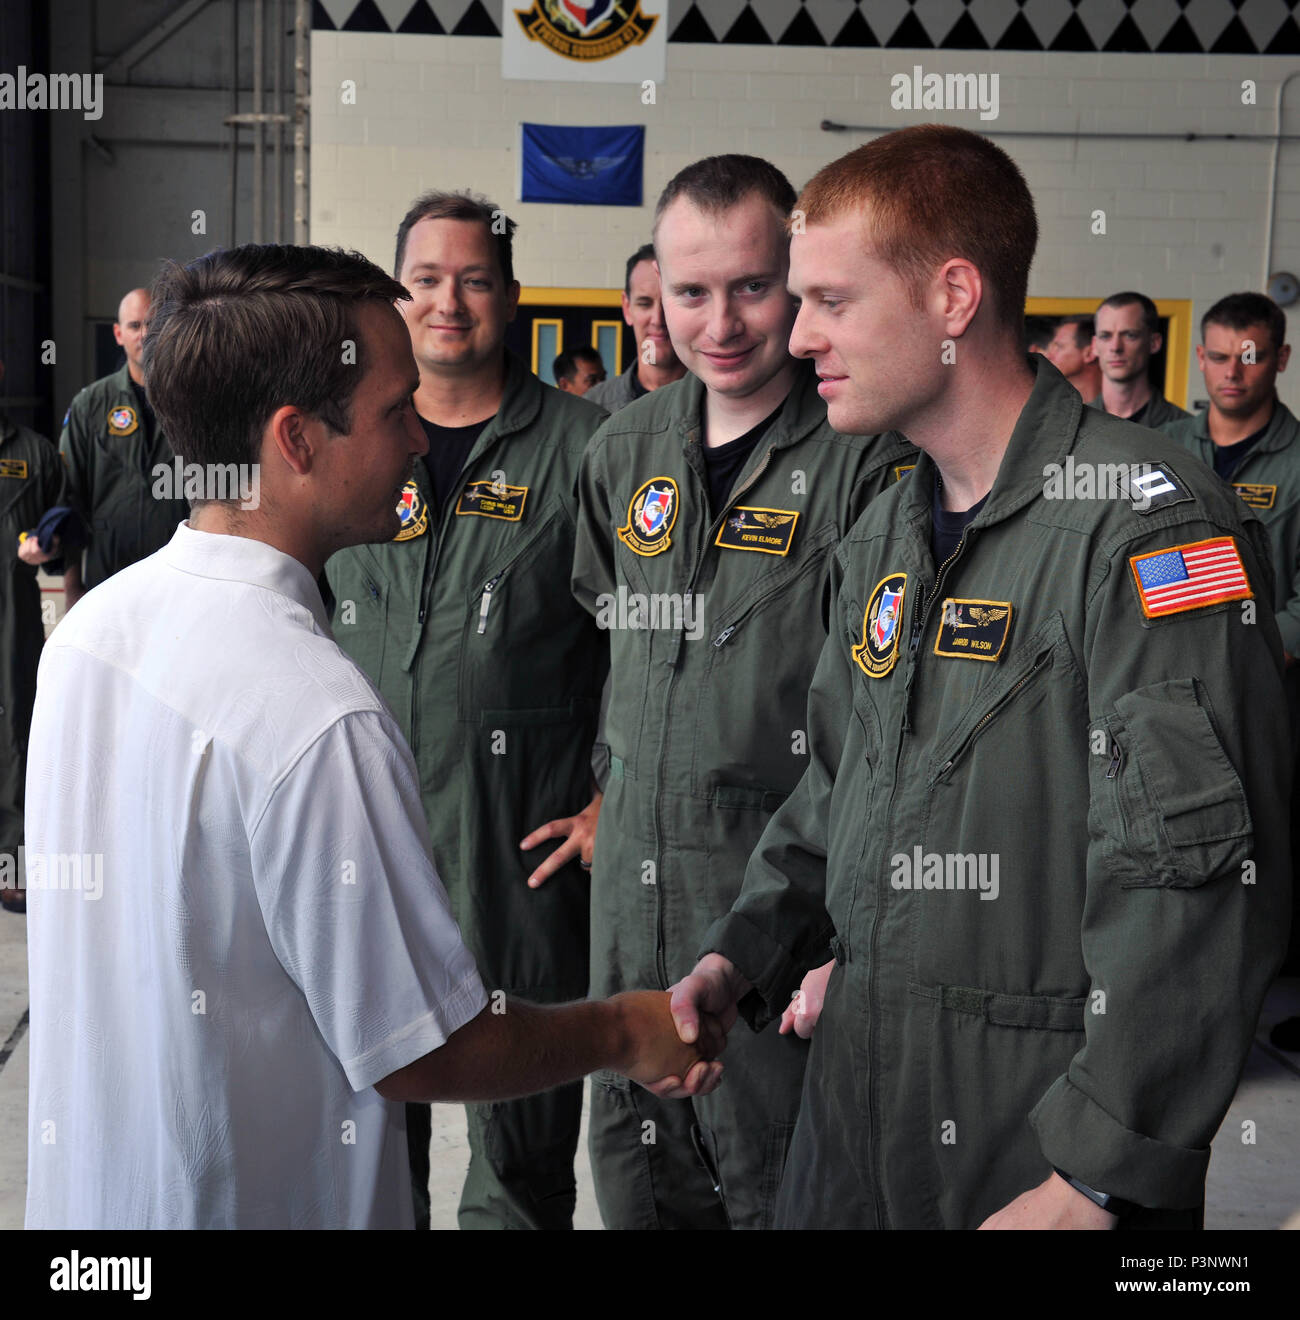 160720-N-ON468-0106 MARINE CORPS BASE HAWAII (July 20, 2016) David McMahon meets with service members from the U.S. Navy and the Royal New Zealand Air Force No. 5 Air Squadron at Marine Corps Base Hawaii during Rim of the Pacific 2016. David and his friend Sydnie Uemoto were involved in a small plane crash nine miles off the coast of the island of Kona, Hawaii July 15, and were rescued by a Coast Guard MH-65 Dolphin helicopter crew following an expansive joint search by U.S. Navy, Royal New Zealand Air Force, U.S. Air Force and Coast Guard crews after a 20-hour search. Twenty-six nations, more Stock Photo